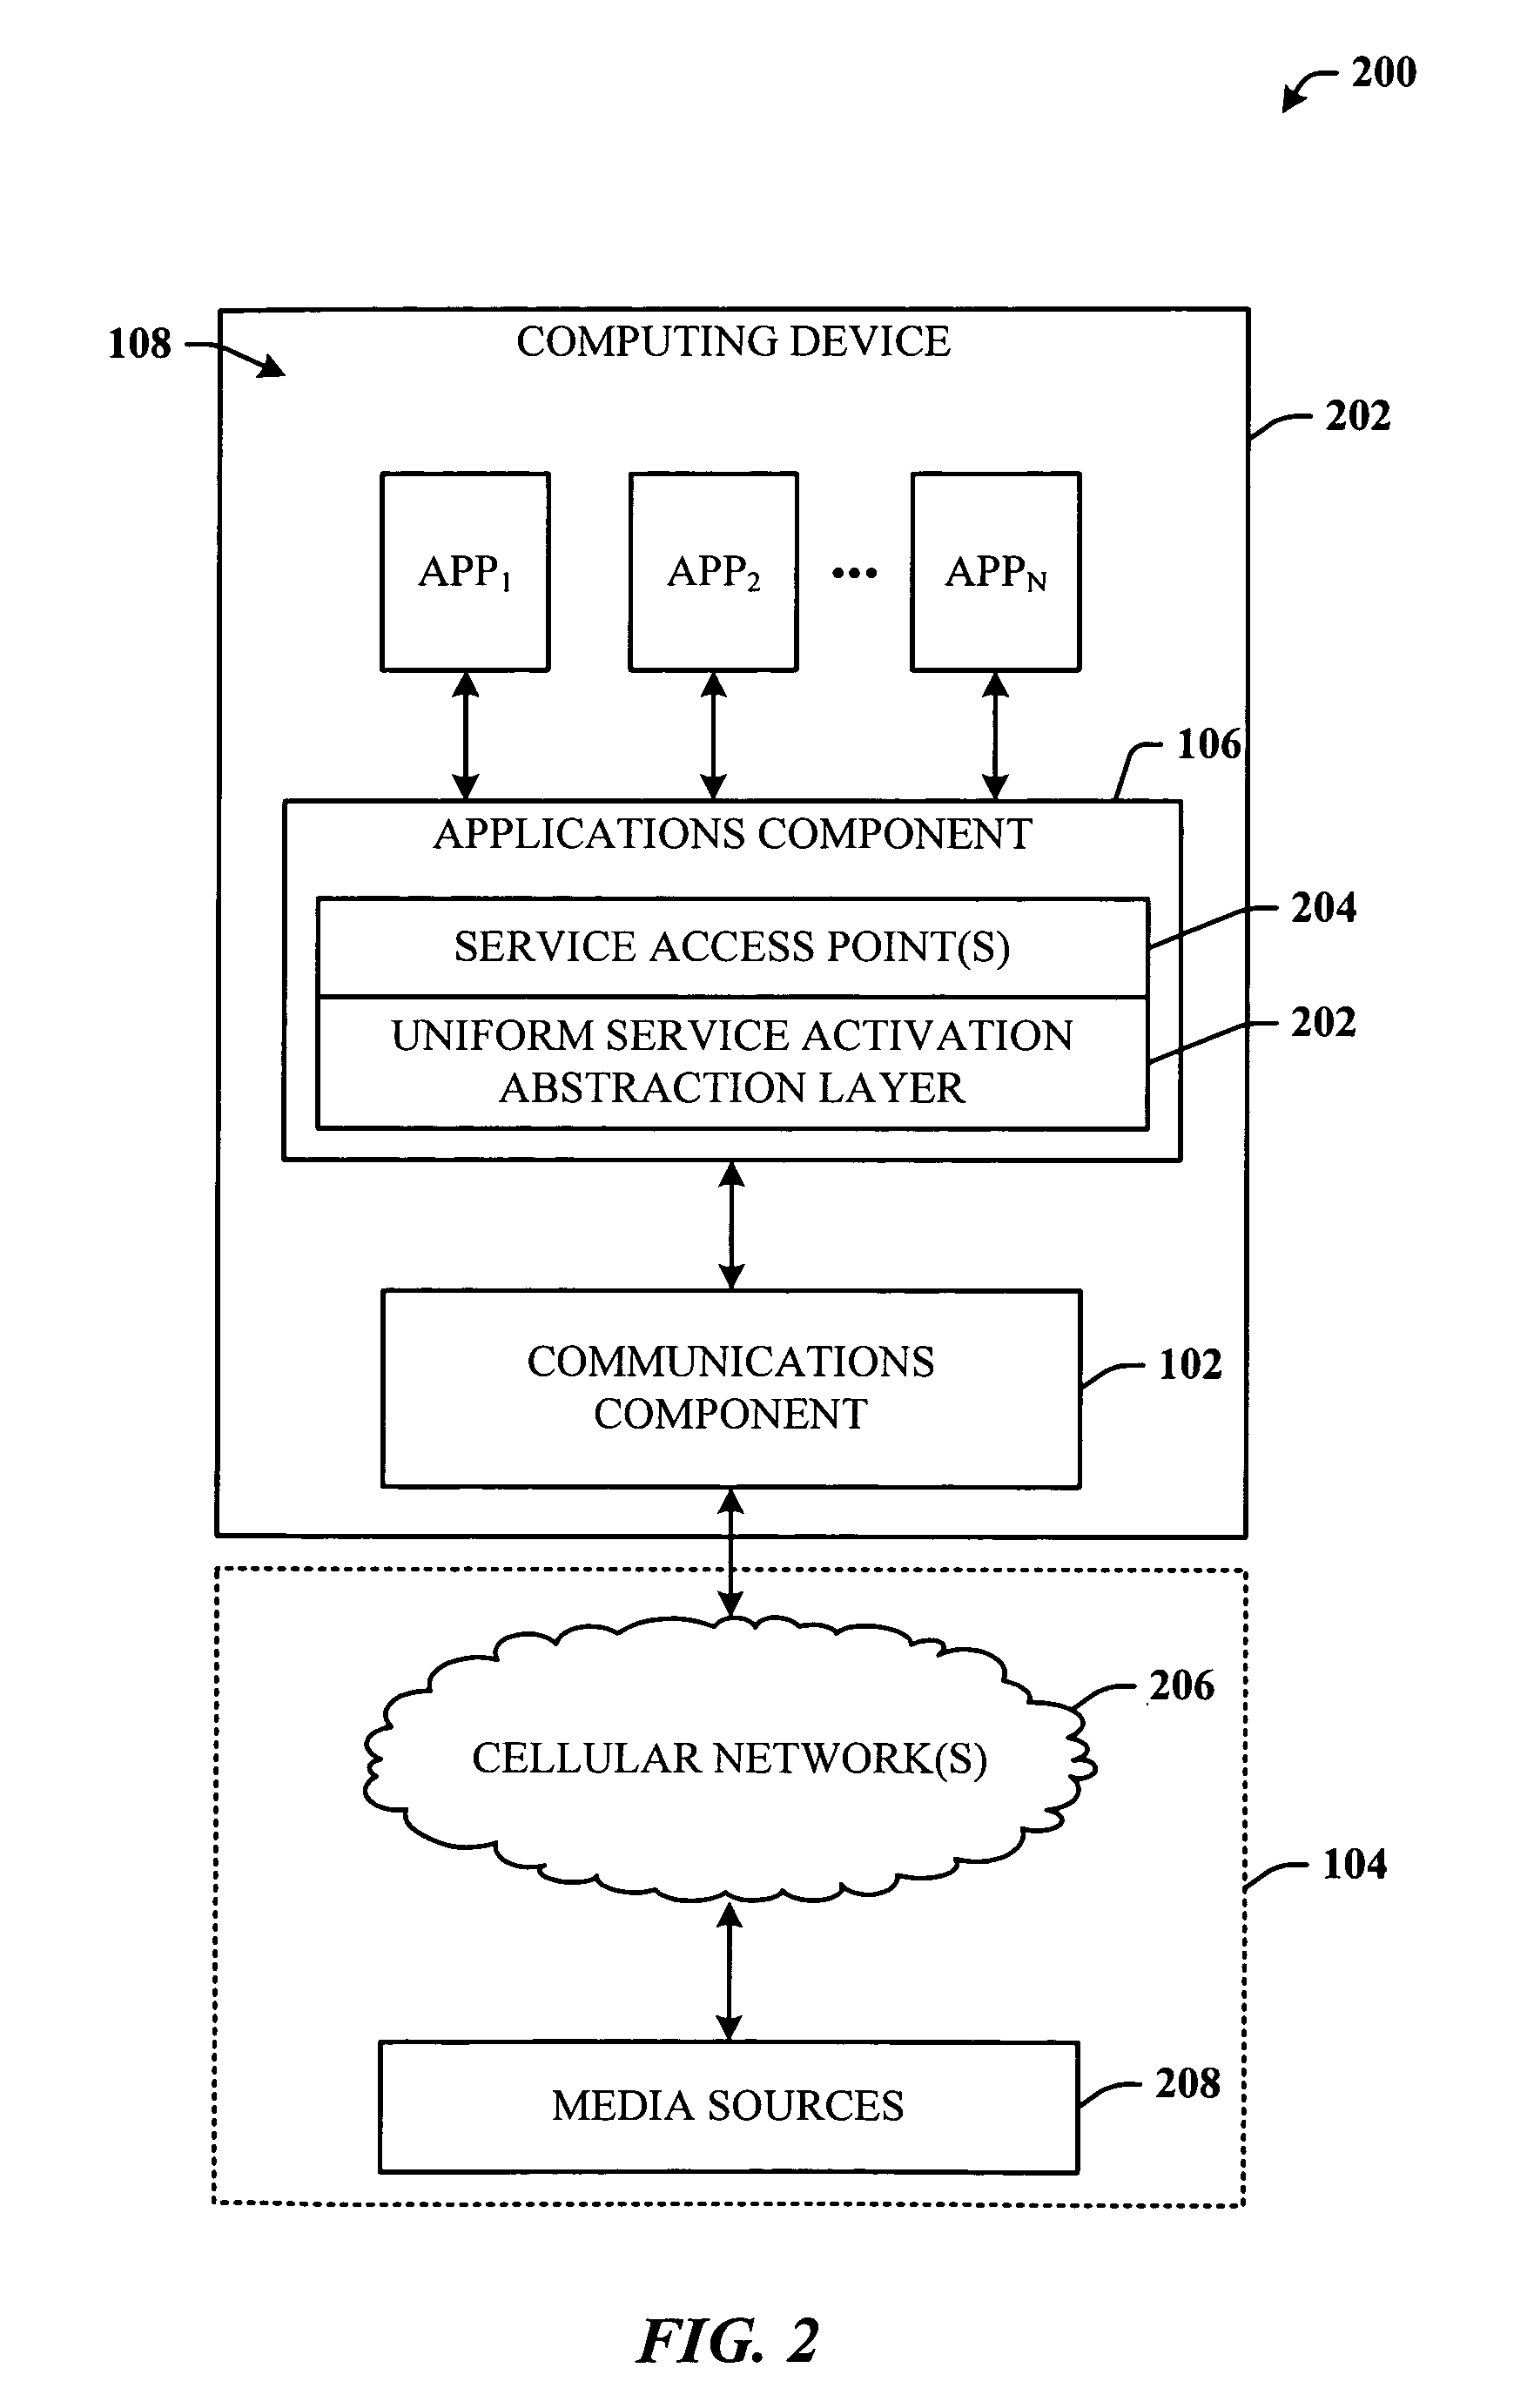 QoS channels for multimedia services on a general purpose operating system platform using data cards